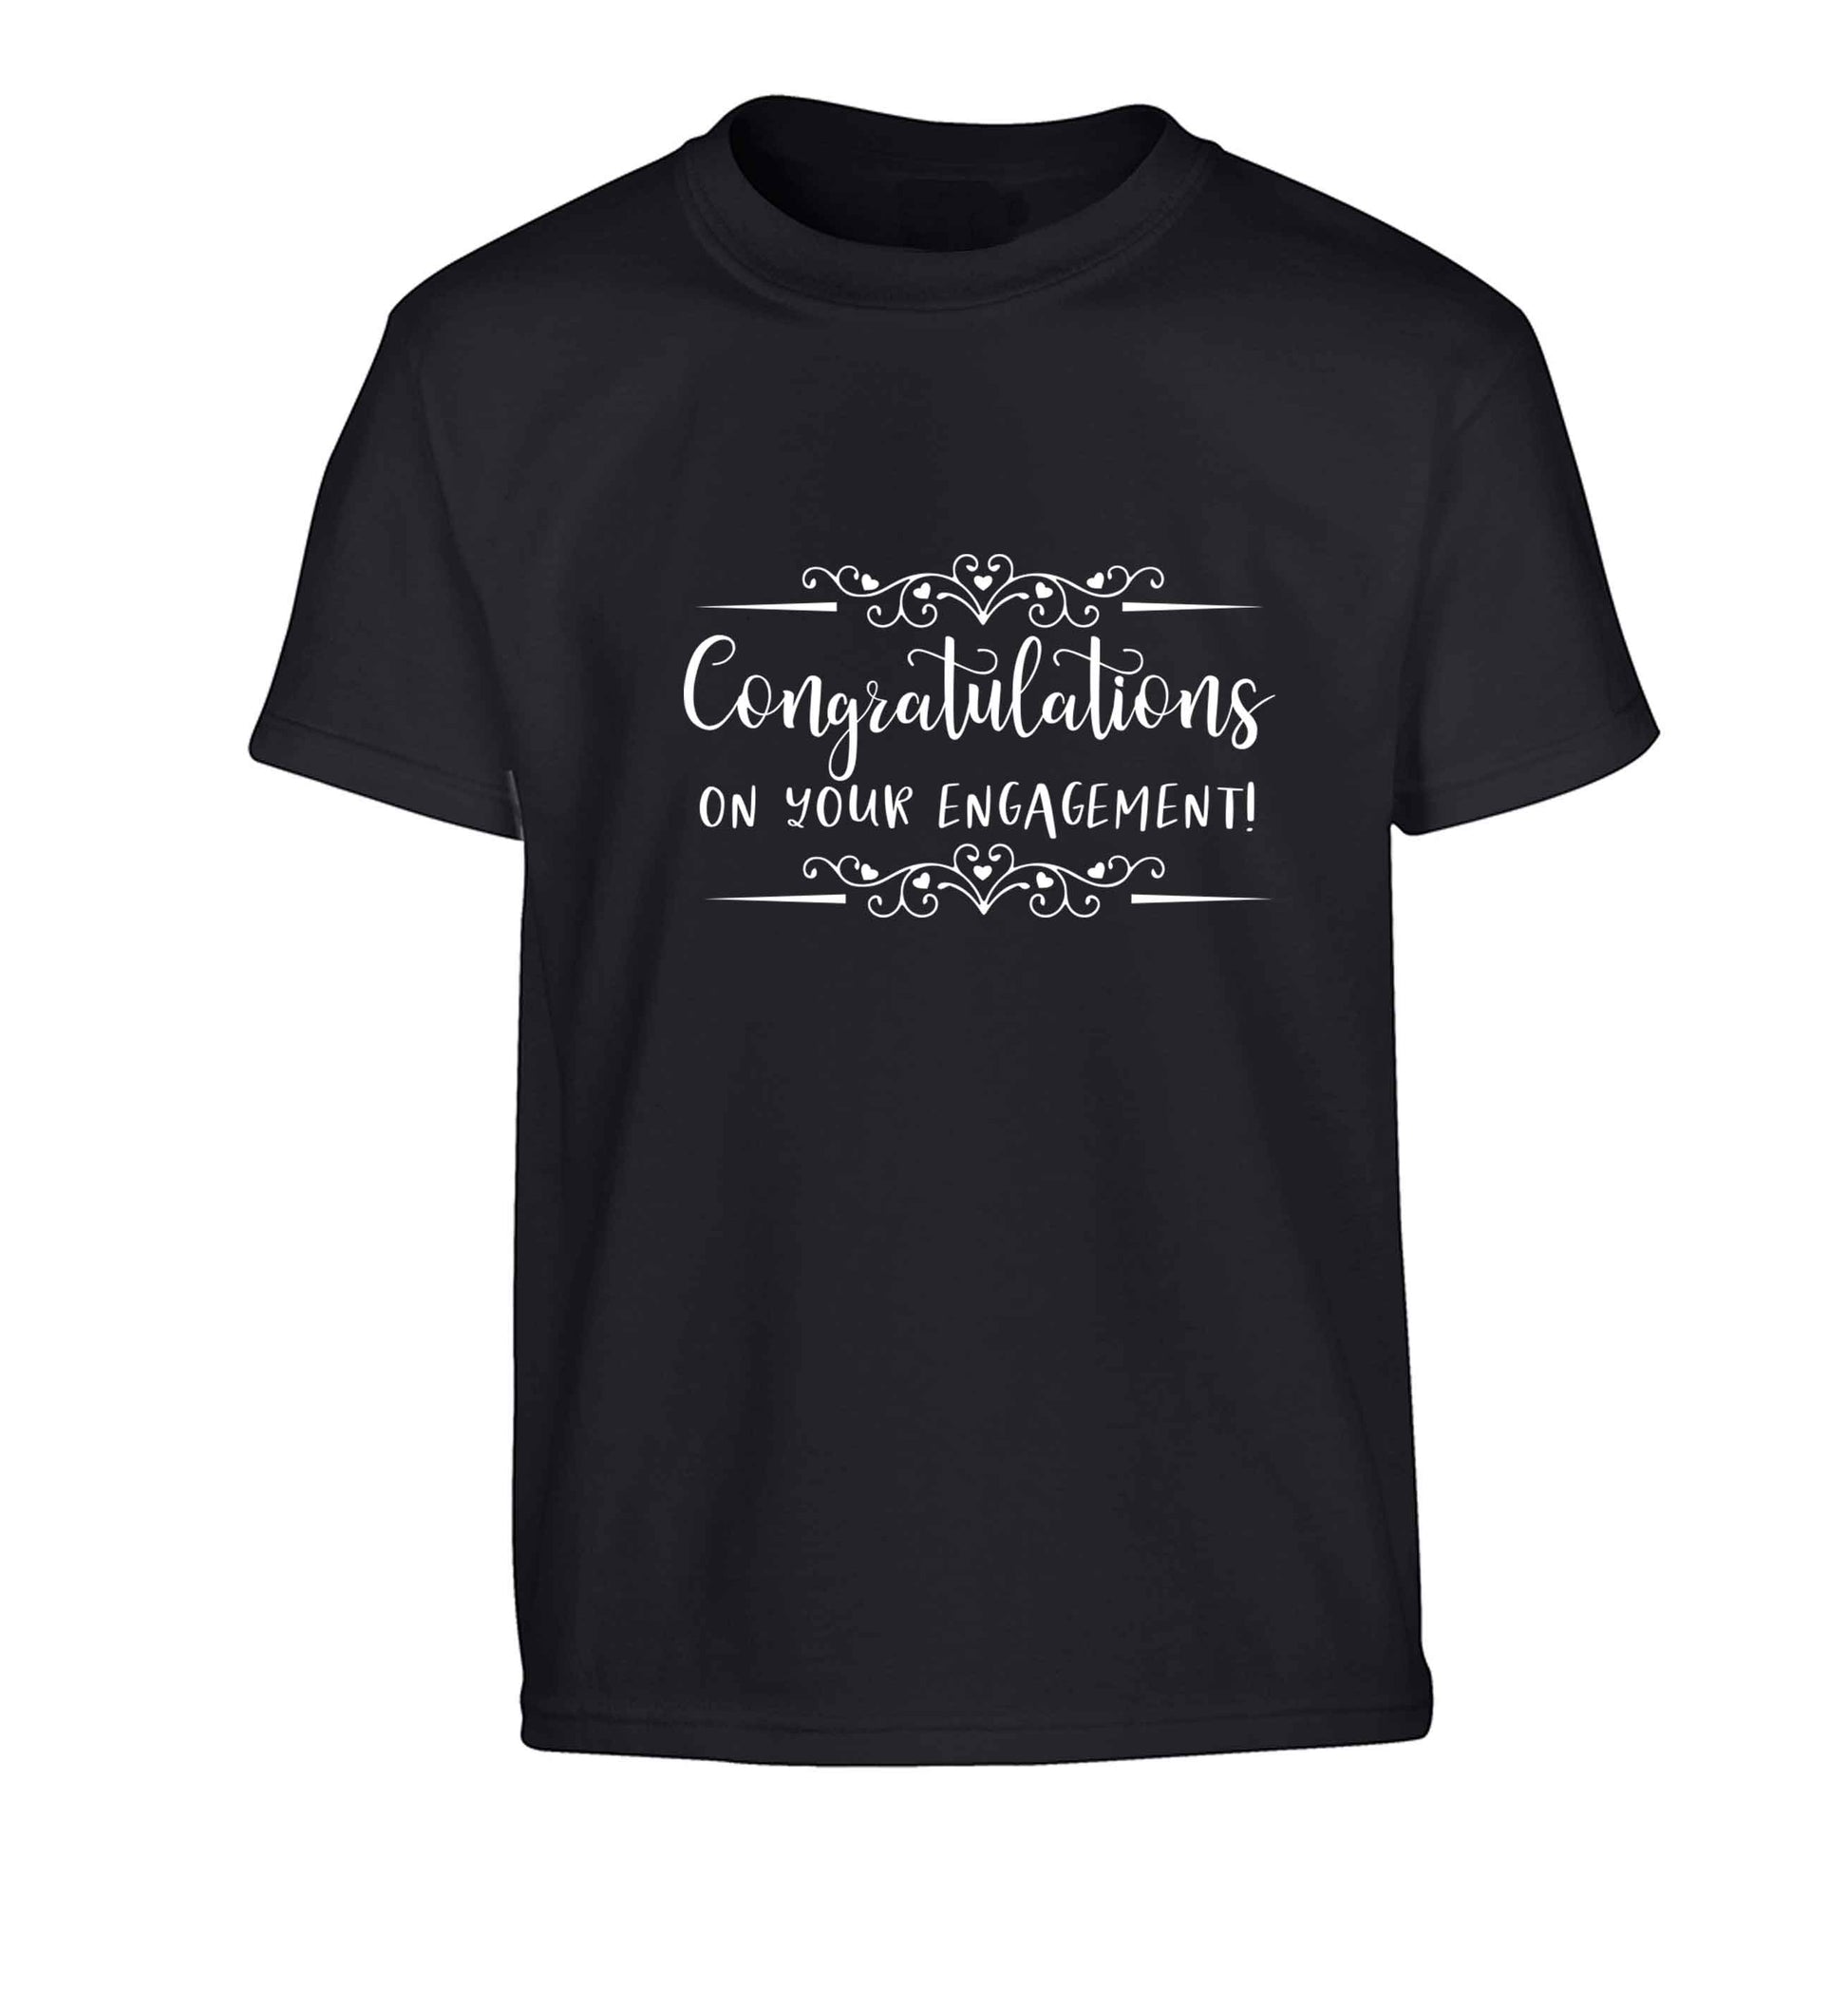 Congratulations on your engagement Children's black Tshirt 12-13 Years